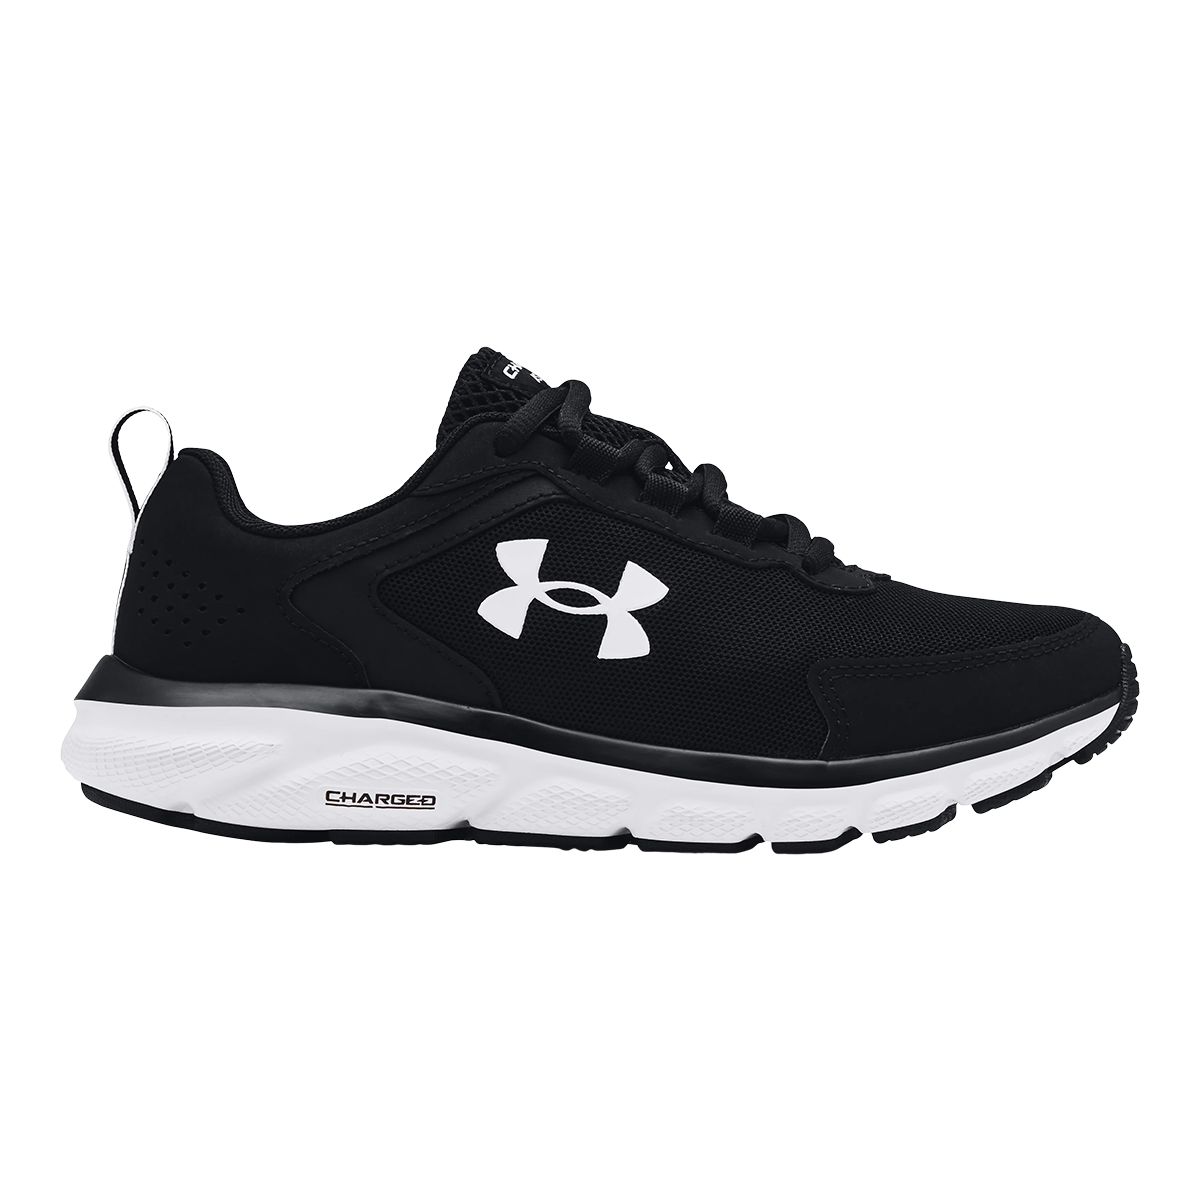 Under Armour Women's Charged Assert 9 Training Shoes, Wide Width